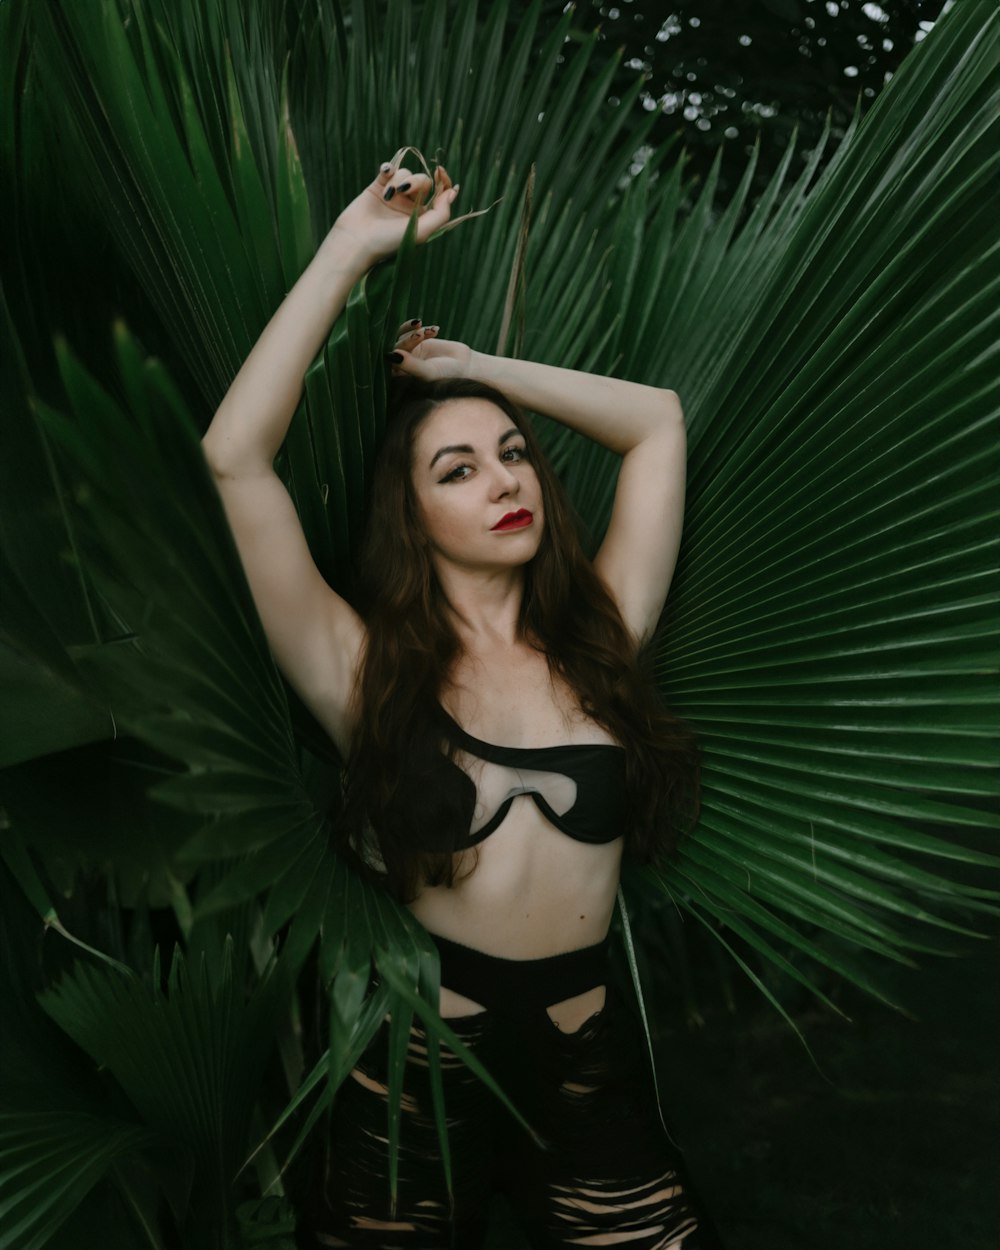 a woman in lingerie posing in front of a palm tree